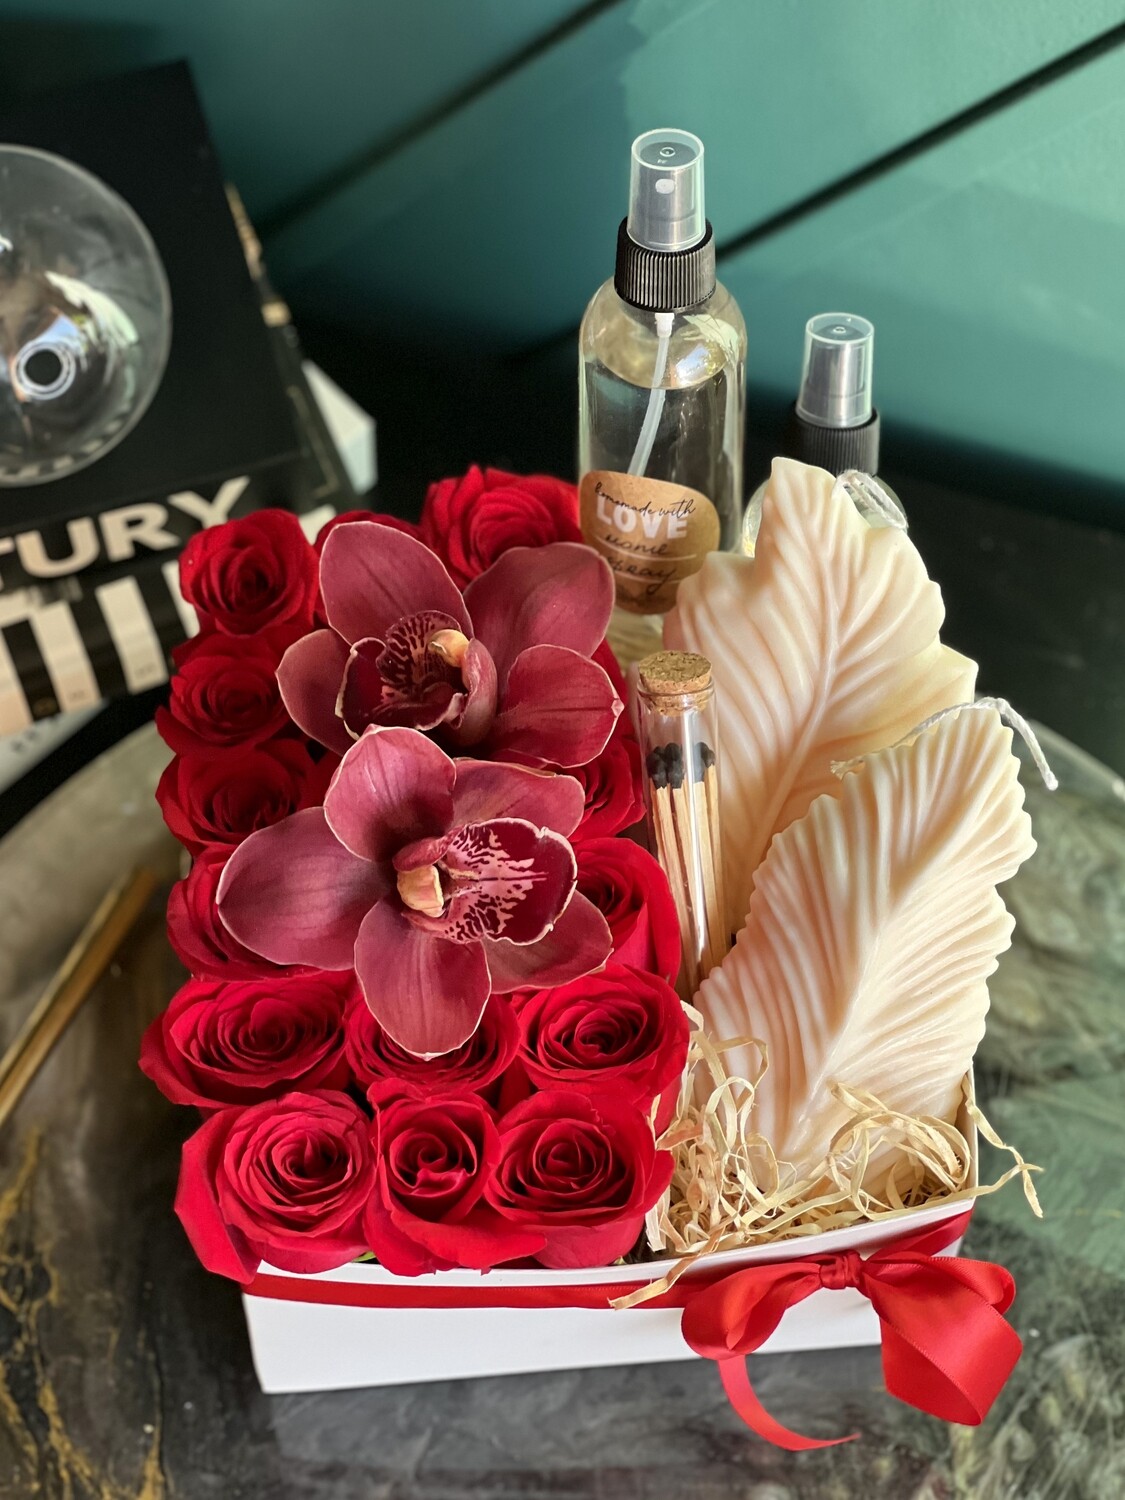 Gift Set With Fresh Flowers And Candles